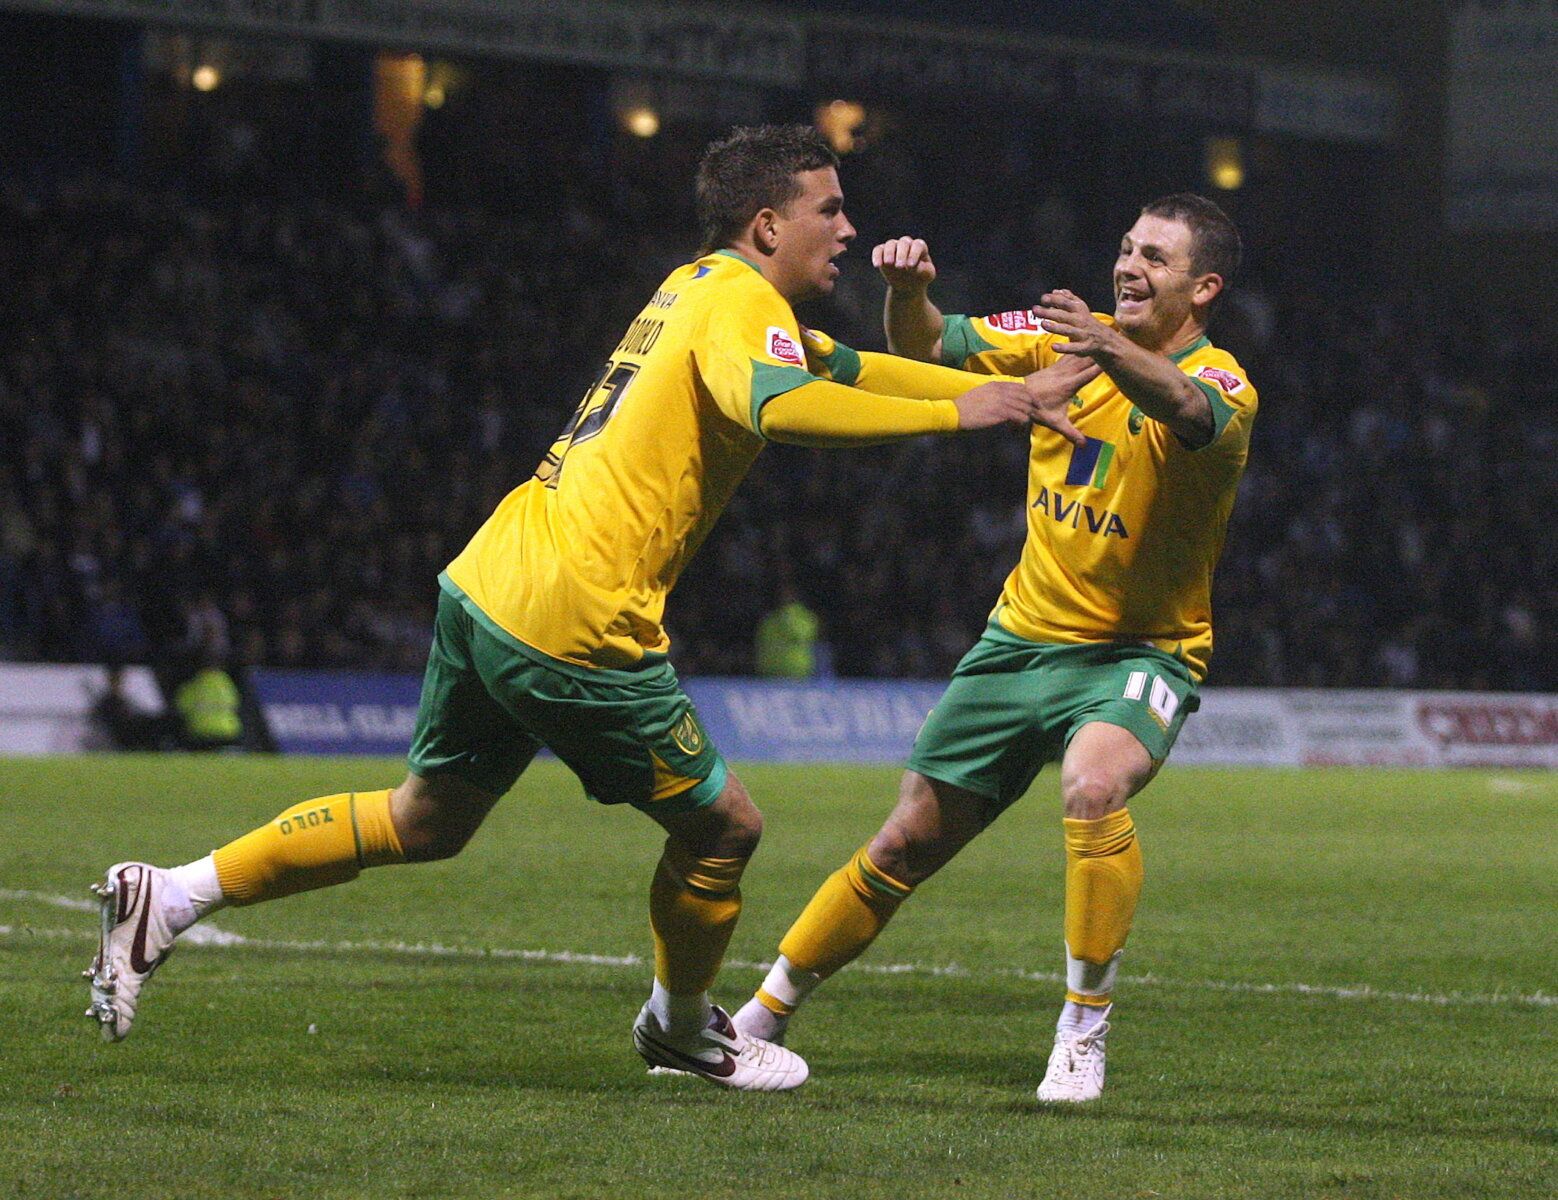 Football - Gillingham v Norwich City Johnstone's Paint Trophy Southern Section Second Round  - Priestfield - 09/10 - 6/10/09 
Cody McDonald of Norwich celebrates scoring the first goal with team mate Jamie Cureton (R) 
Mandatory Credit: Action Images / Matthew Childs 
Livepic